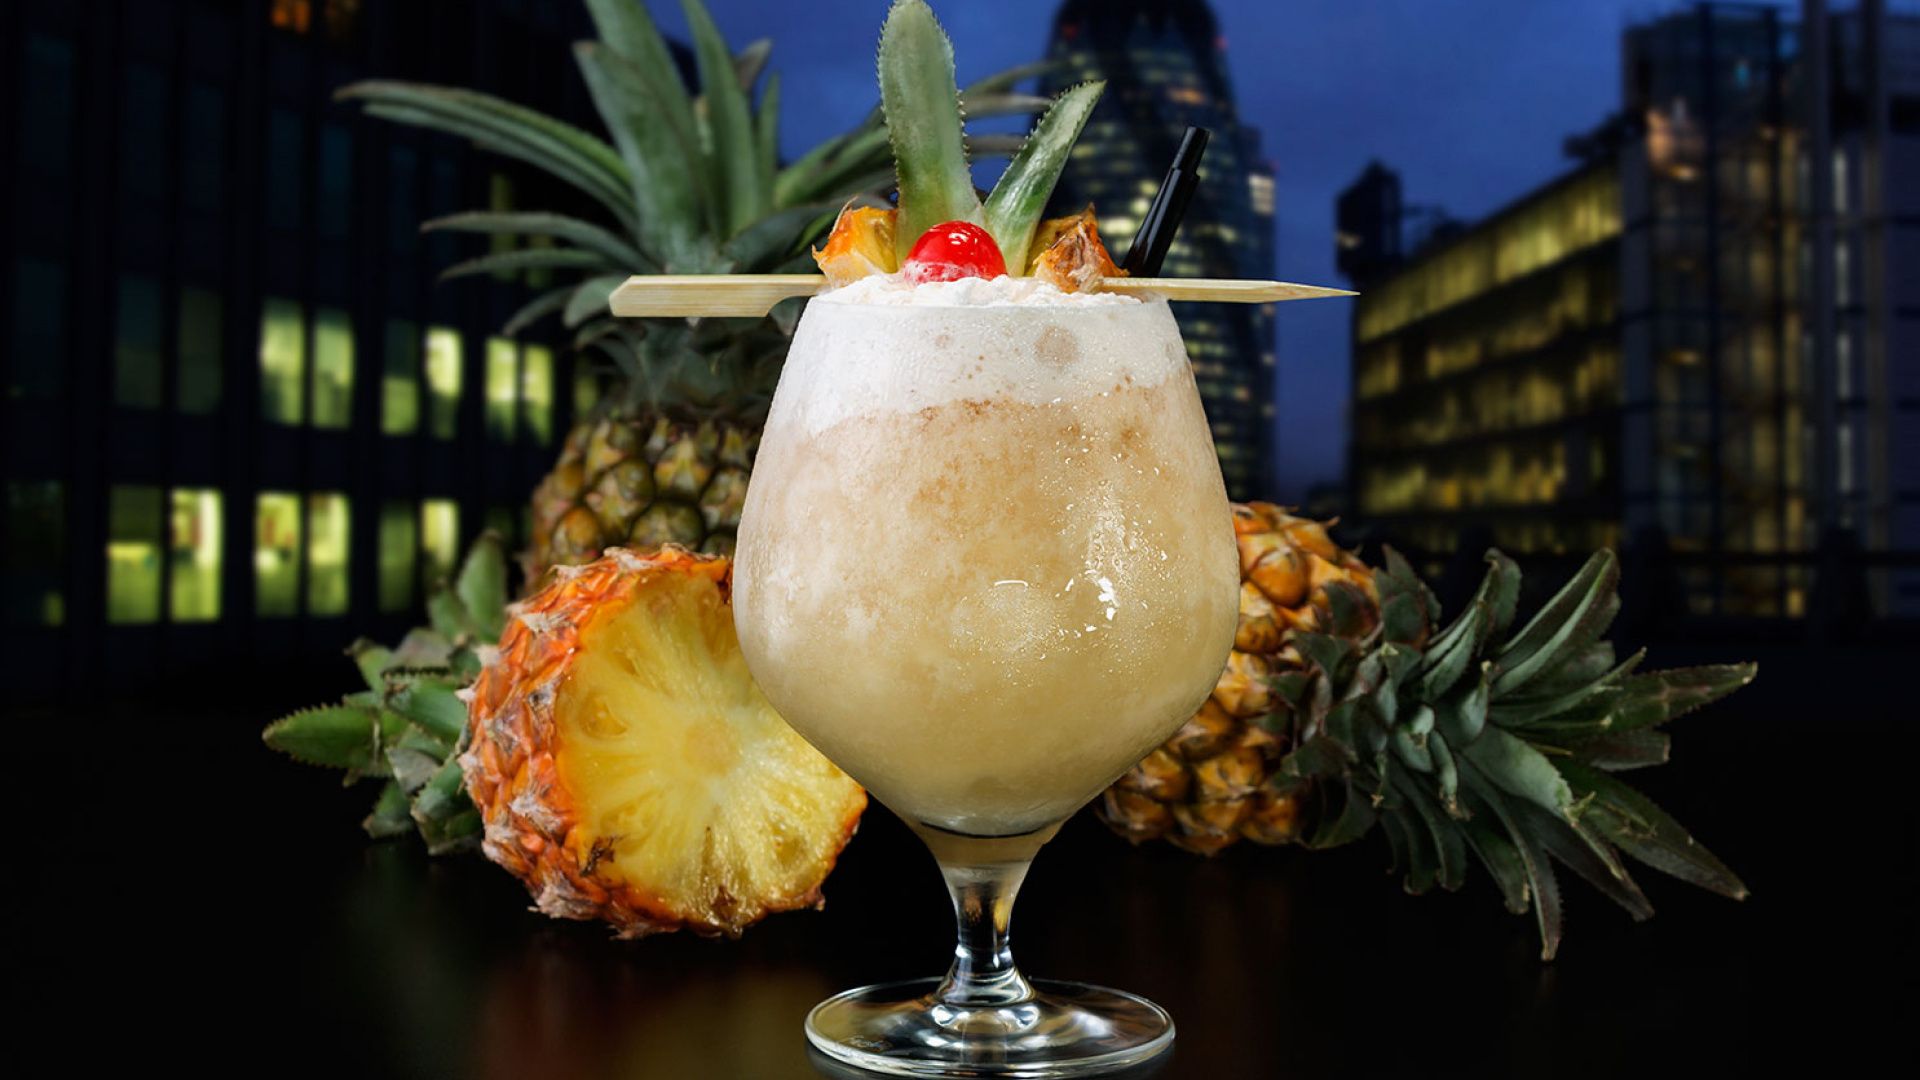 Kick your pina colada up a notch with tequila.